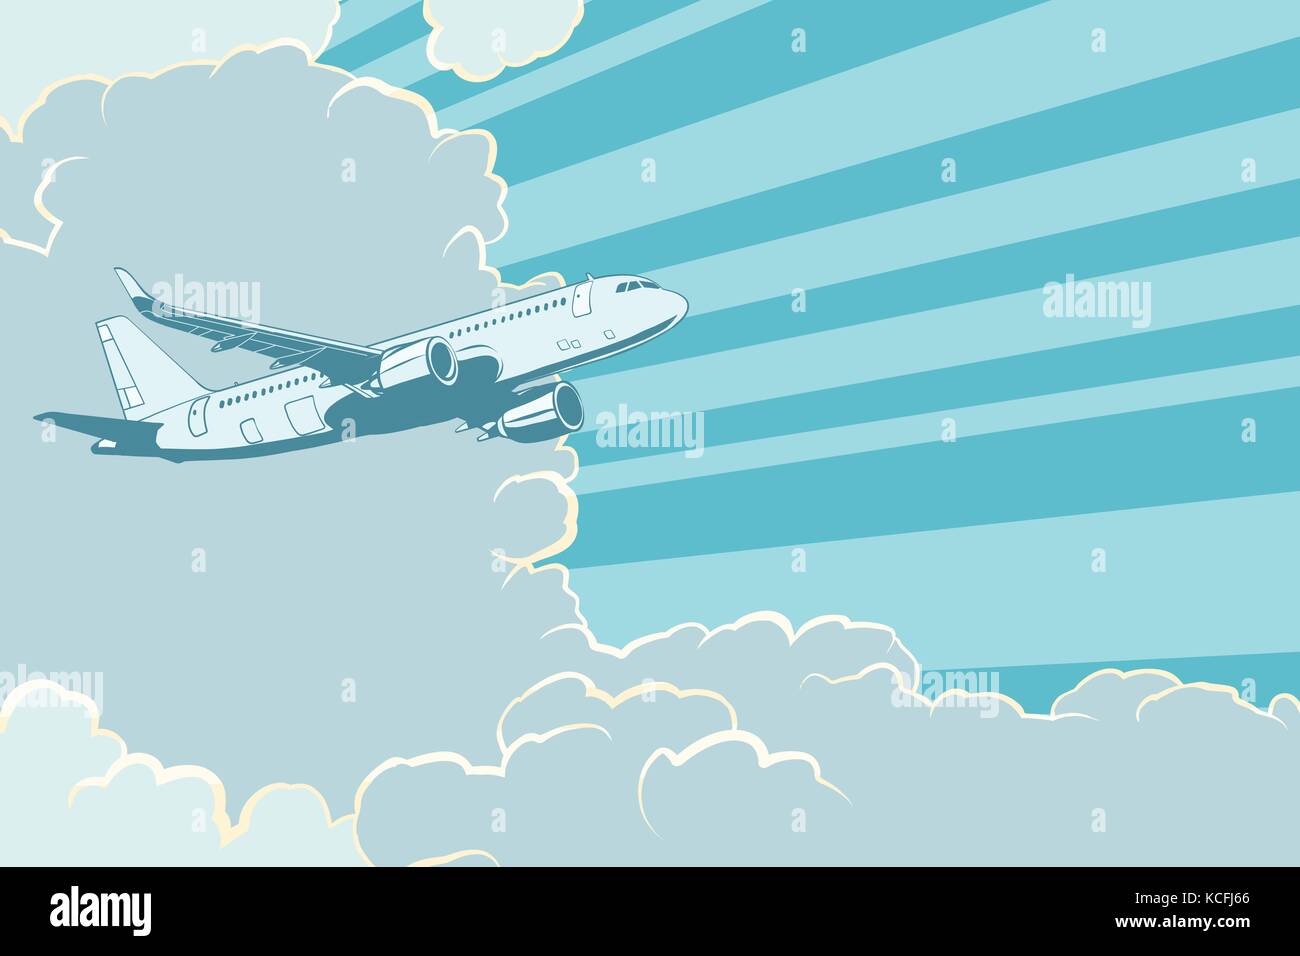 Retro airplane flying in the clouds. Air travel background Stock Vector